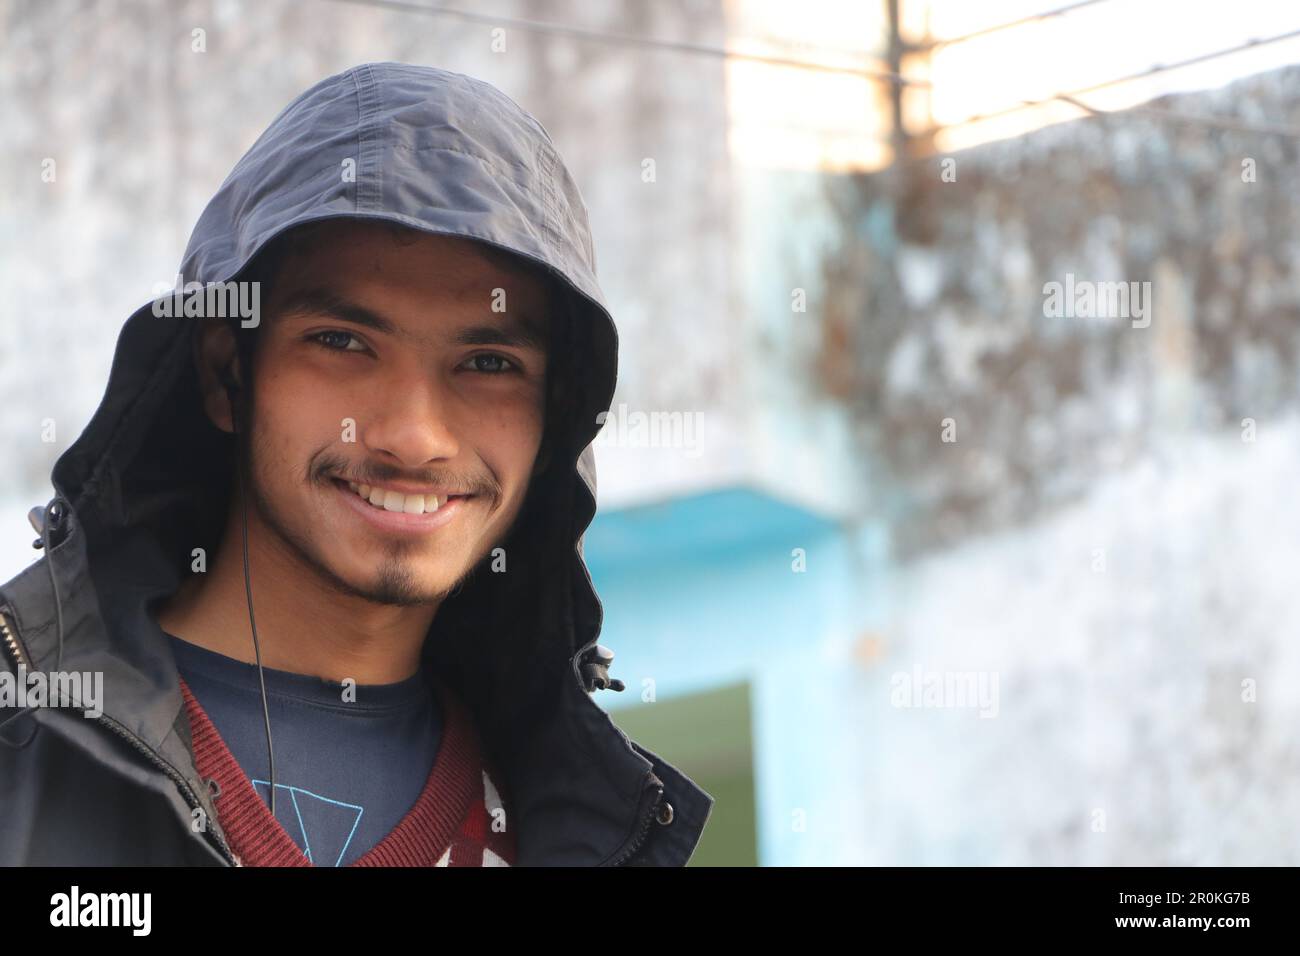 A Young Beautiful Boy Smiling in Portrait. Wearing hoodie, outside in street looking in camera. Stock Photo